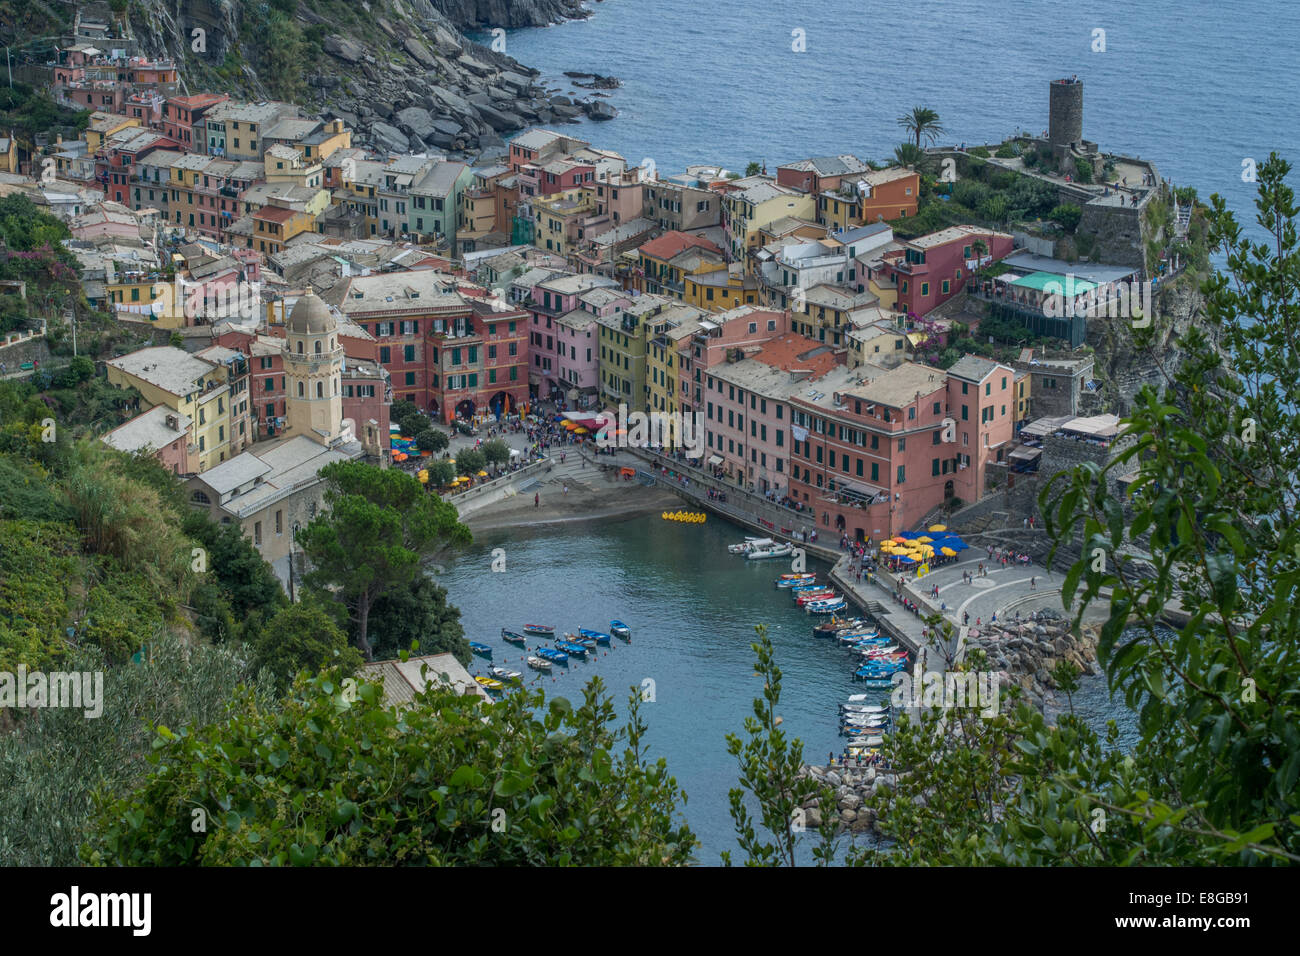 View from coastal path of the town of Vernazza, Cinque Terre (Five Lands), Liguria region, Italy. Stock Photo